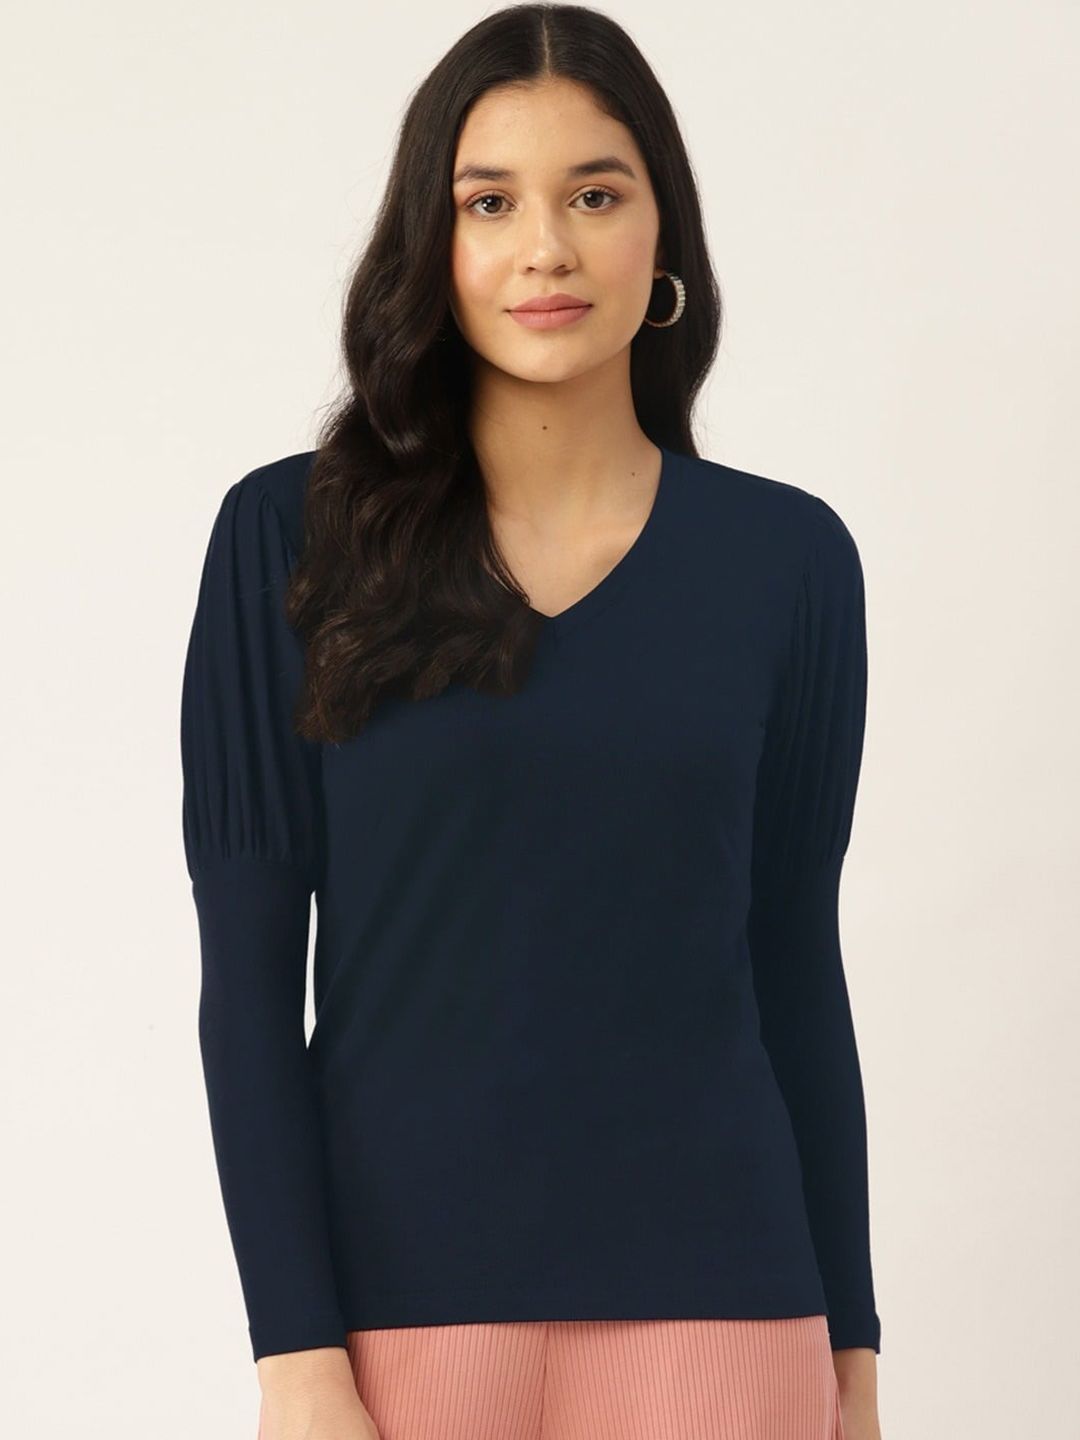 UNMADE V-Neck Puff Sleeves Top Price in India